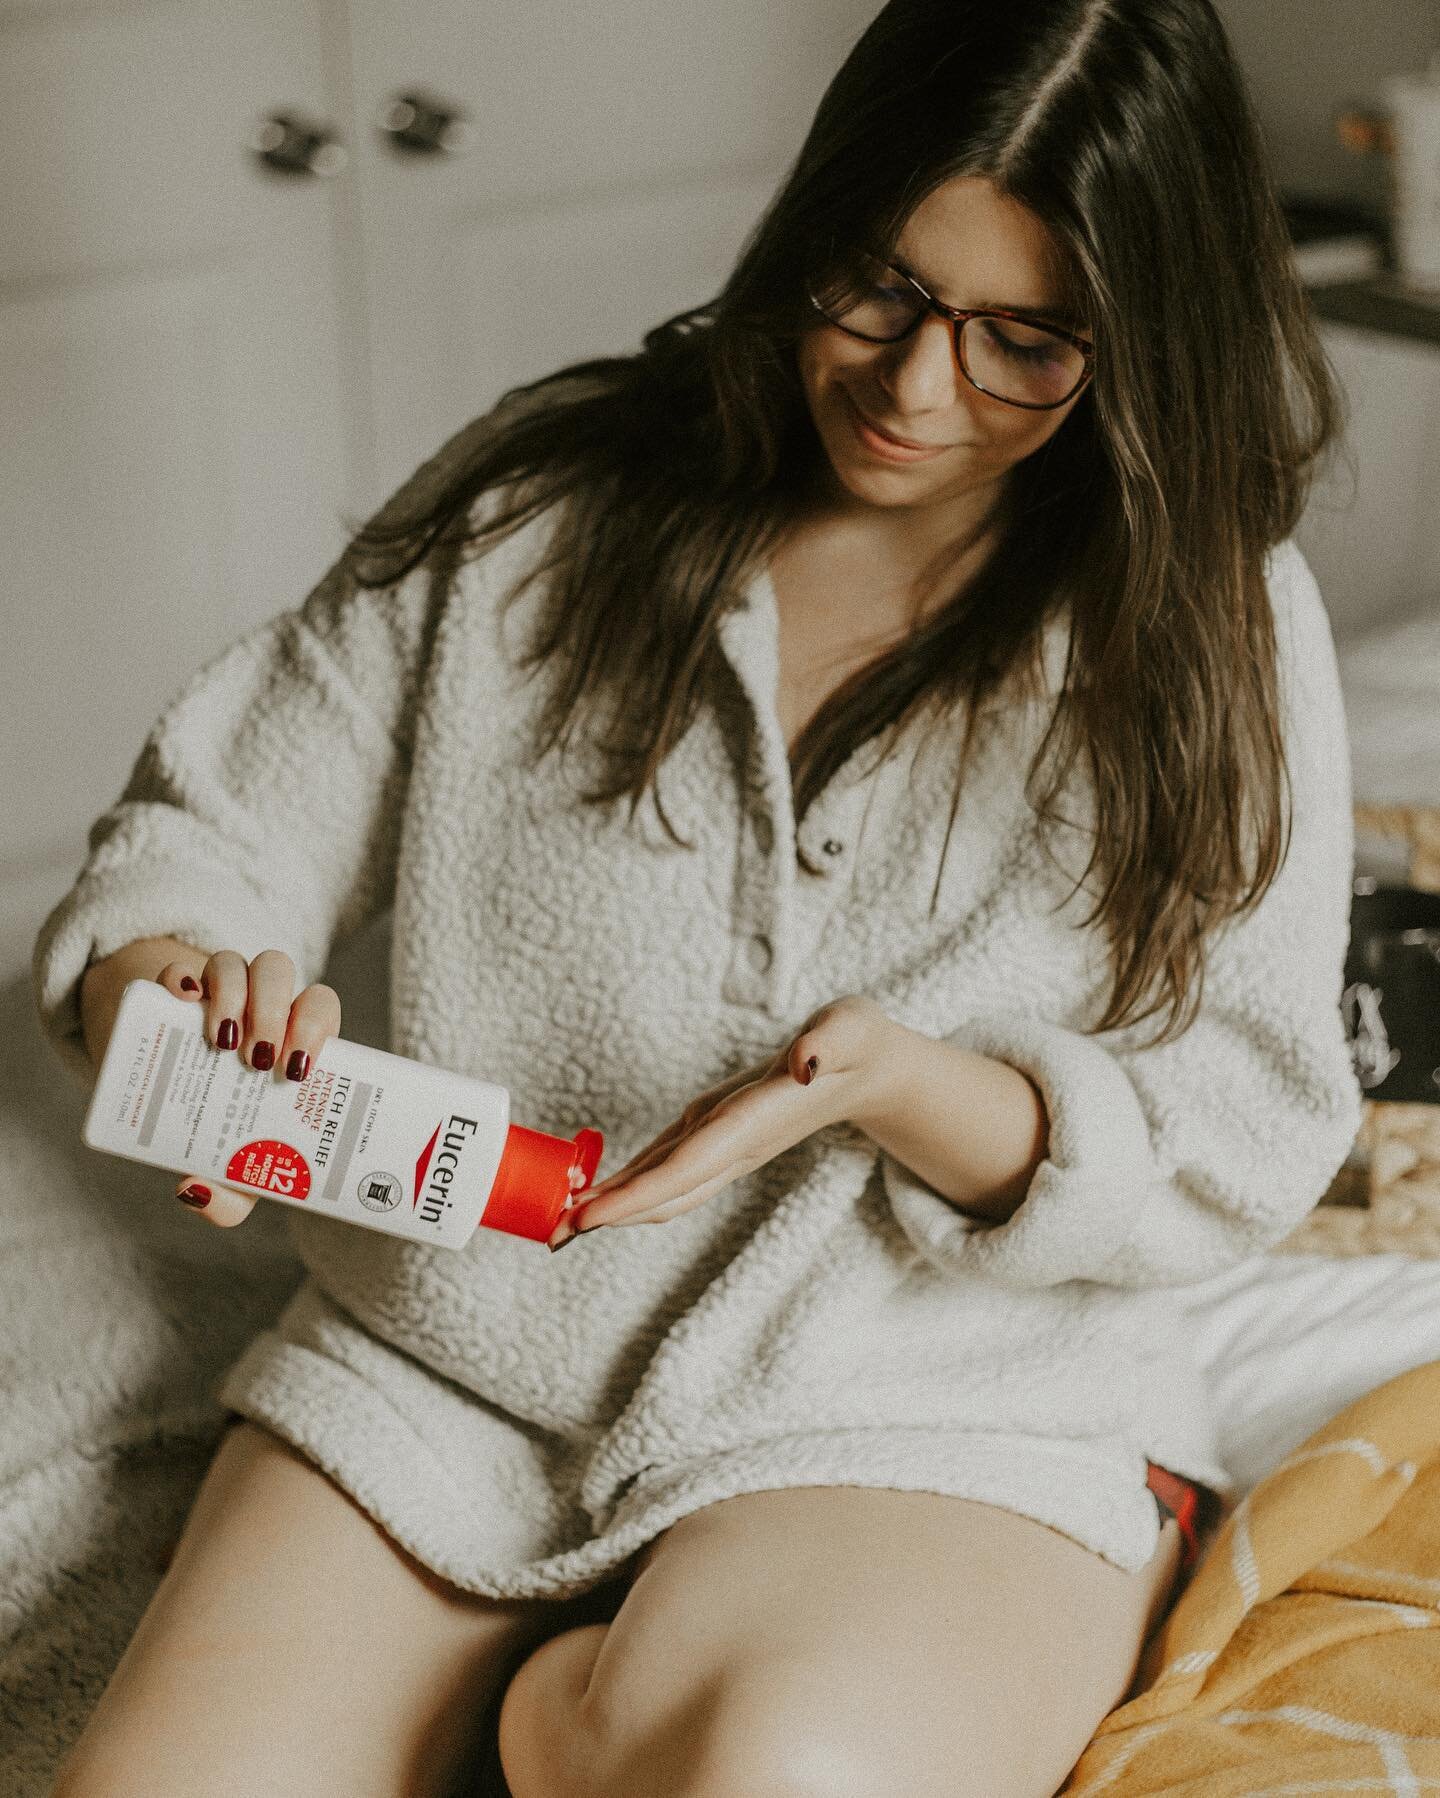 #ad Just over here trying to stay silky smoooooth. Colder temps are almost upon us which means our skin is soon going to need some extra TLC, especially those hands because of the extra washing! ✋🏻 Eucerin, a dermatologist-recommended brand, is with